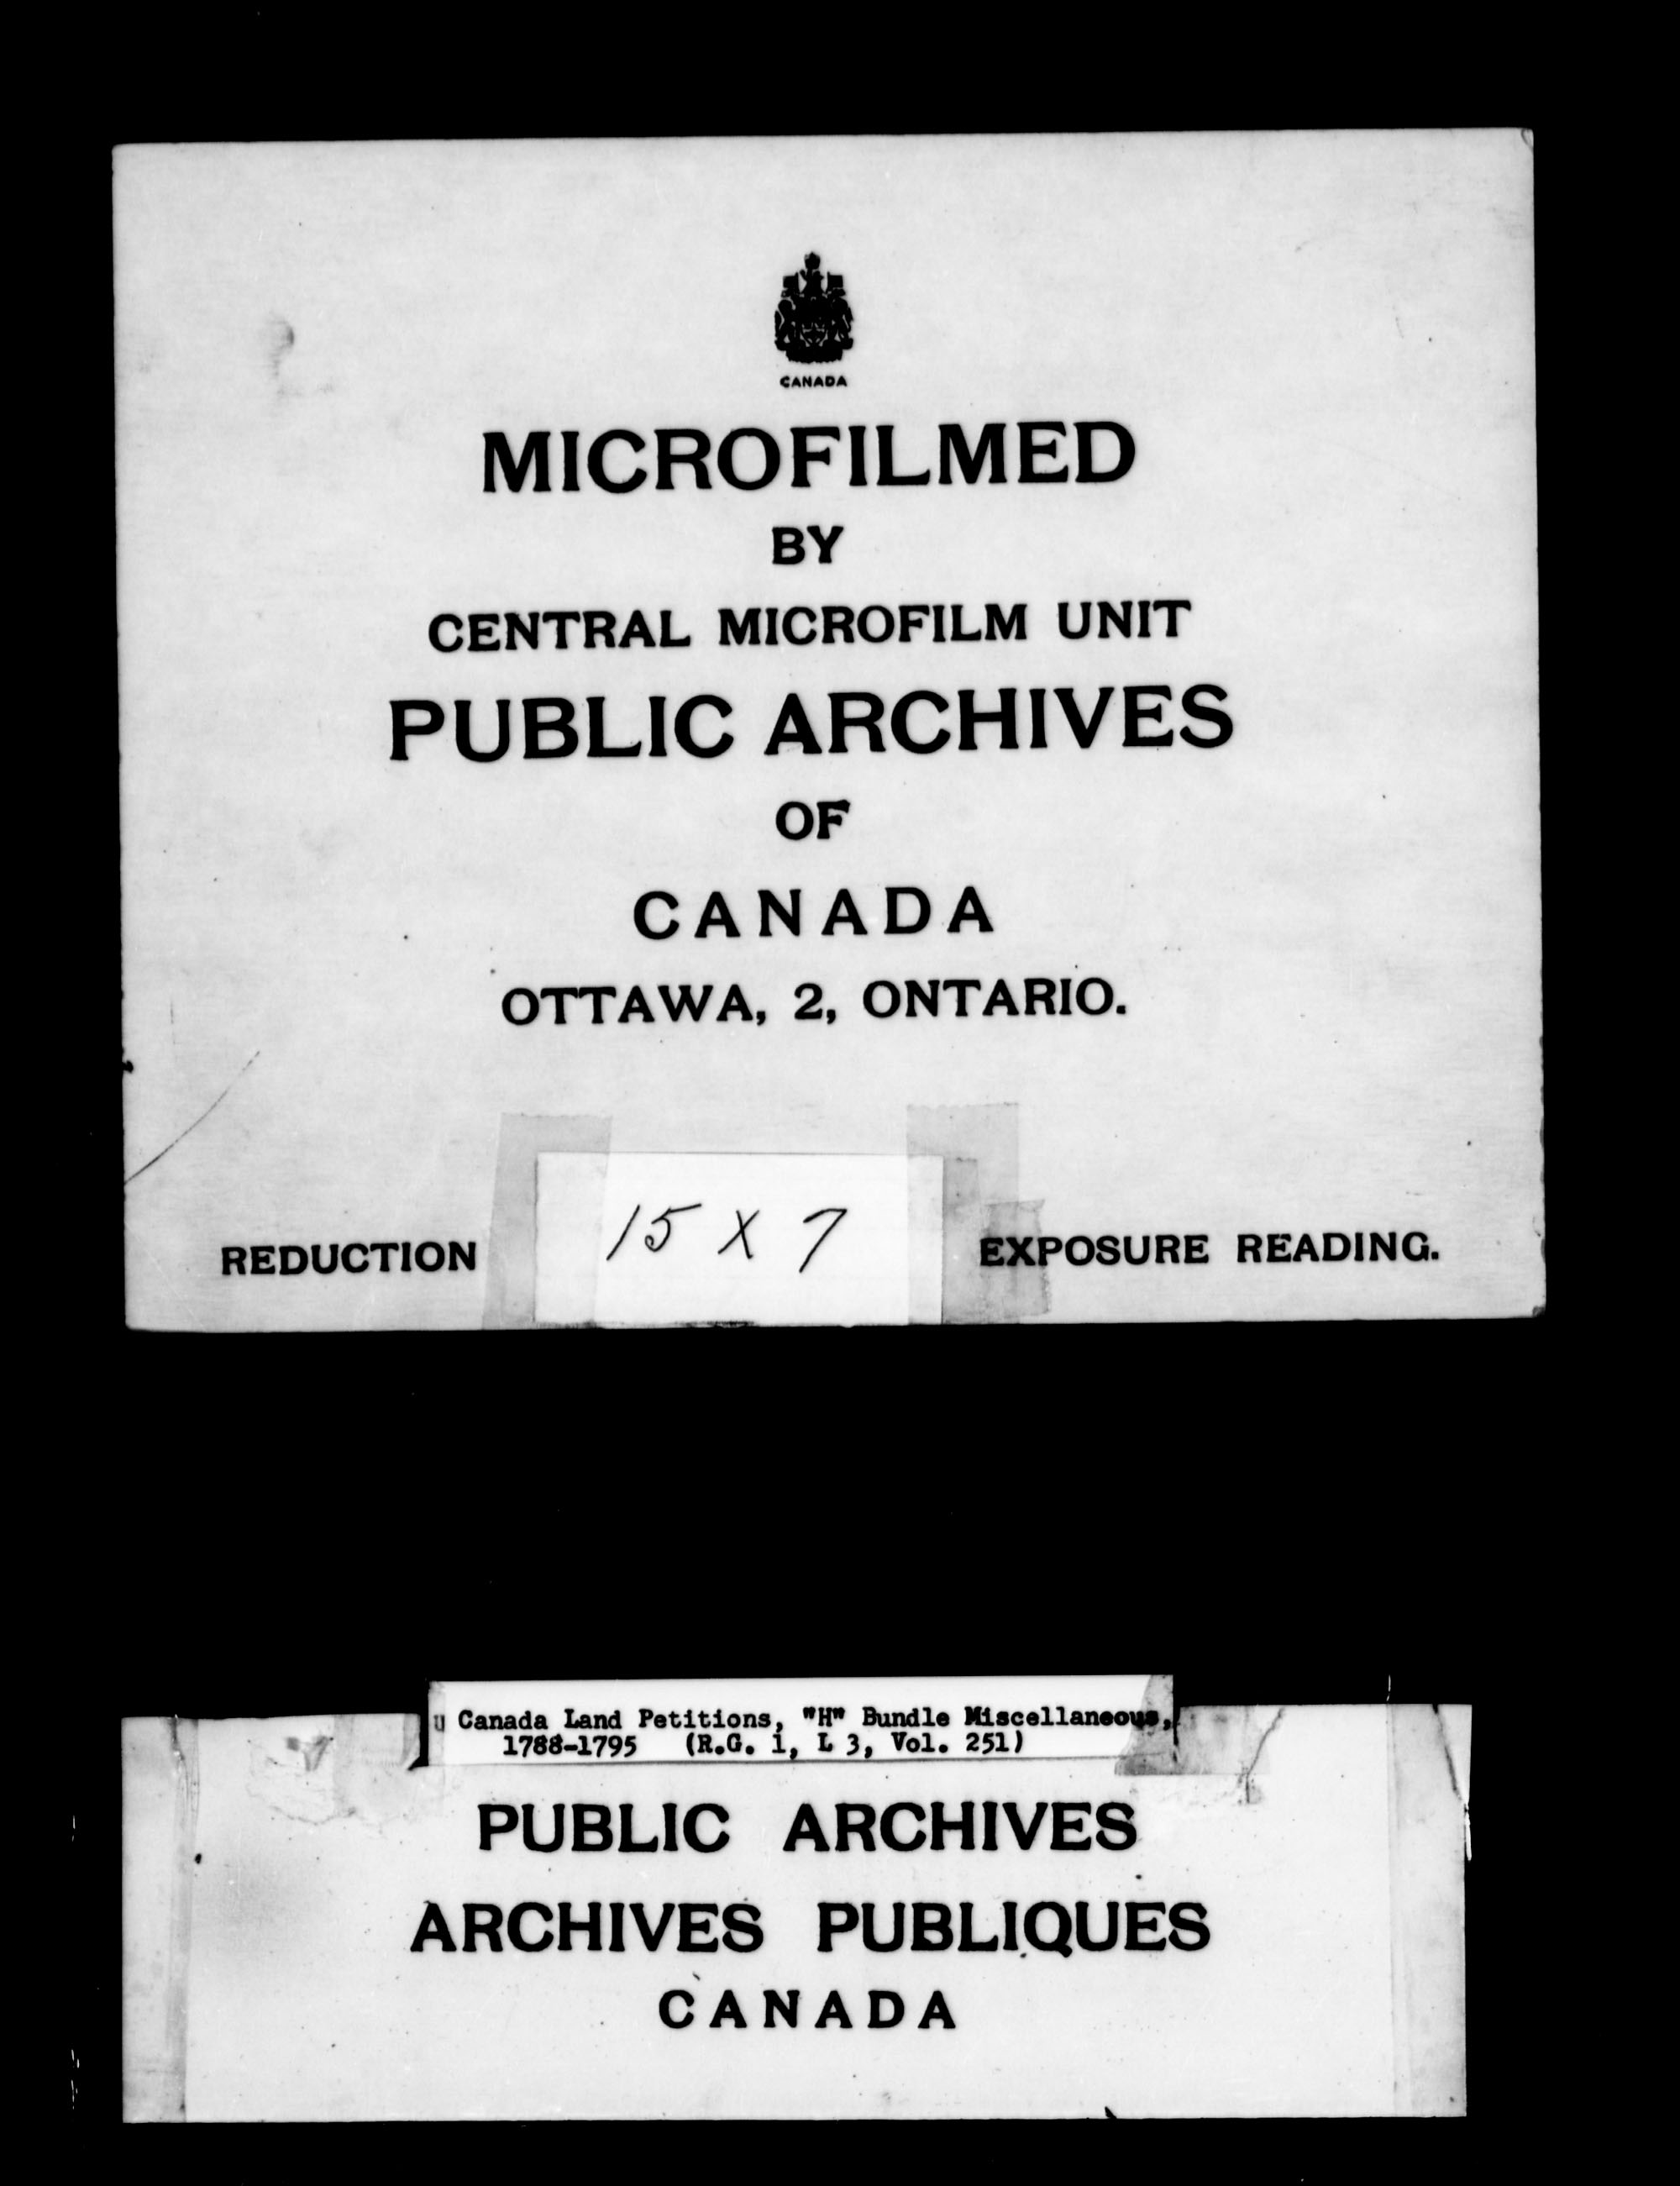 Title: Upper Canada Land Petitions (1763-1865) - Mikan Number: 205131 - Microform: c-2107